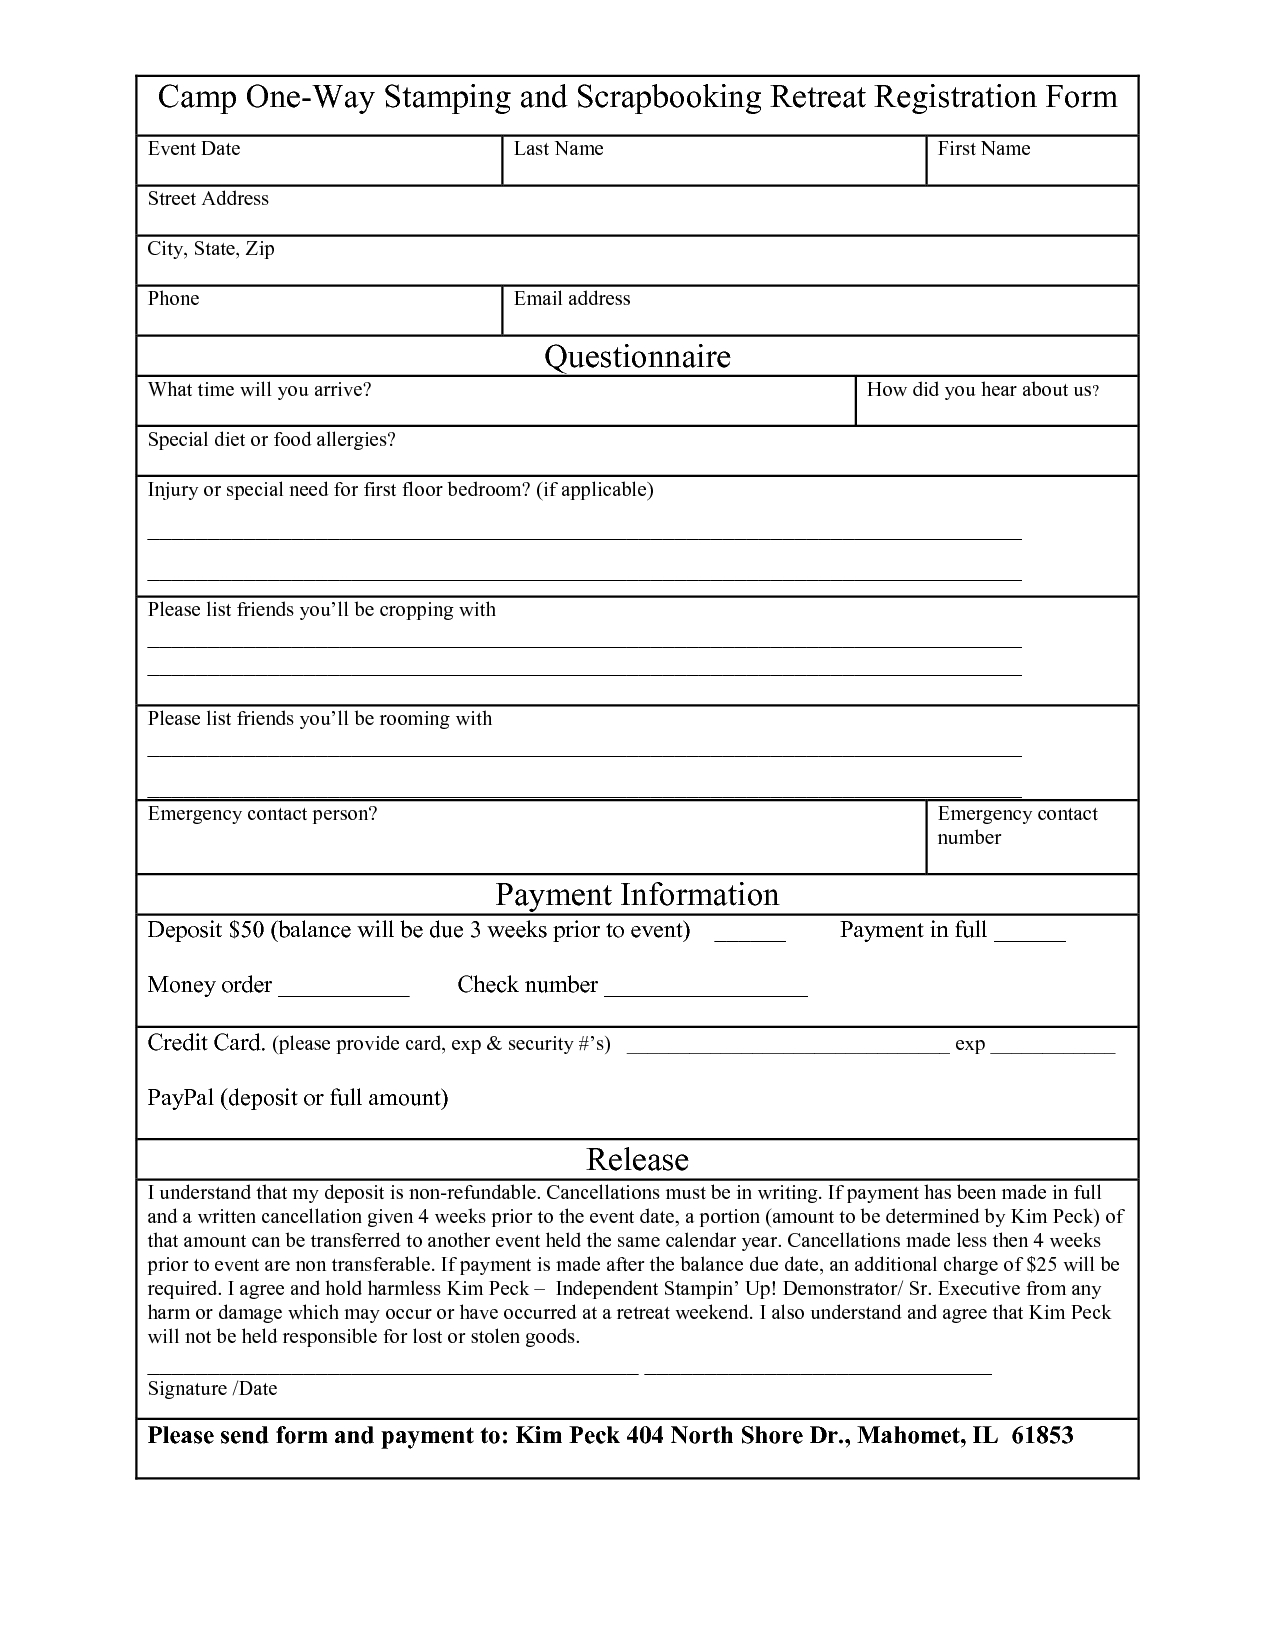 Free Registration Form Template Word Want A Free Refresher With Camp Registration Form Template Word